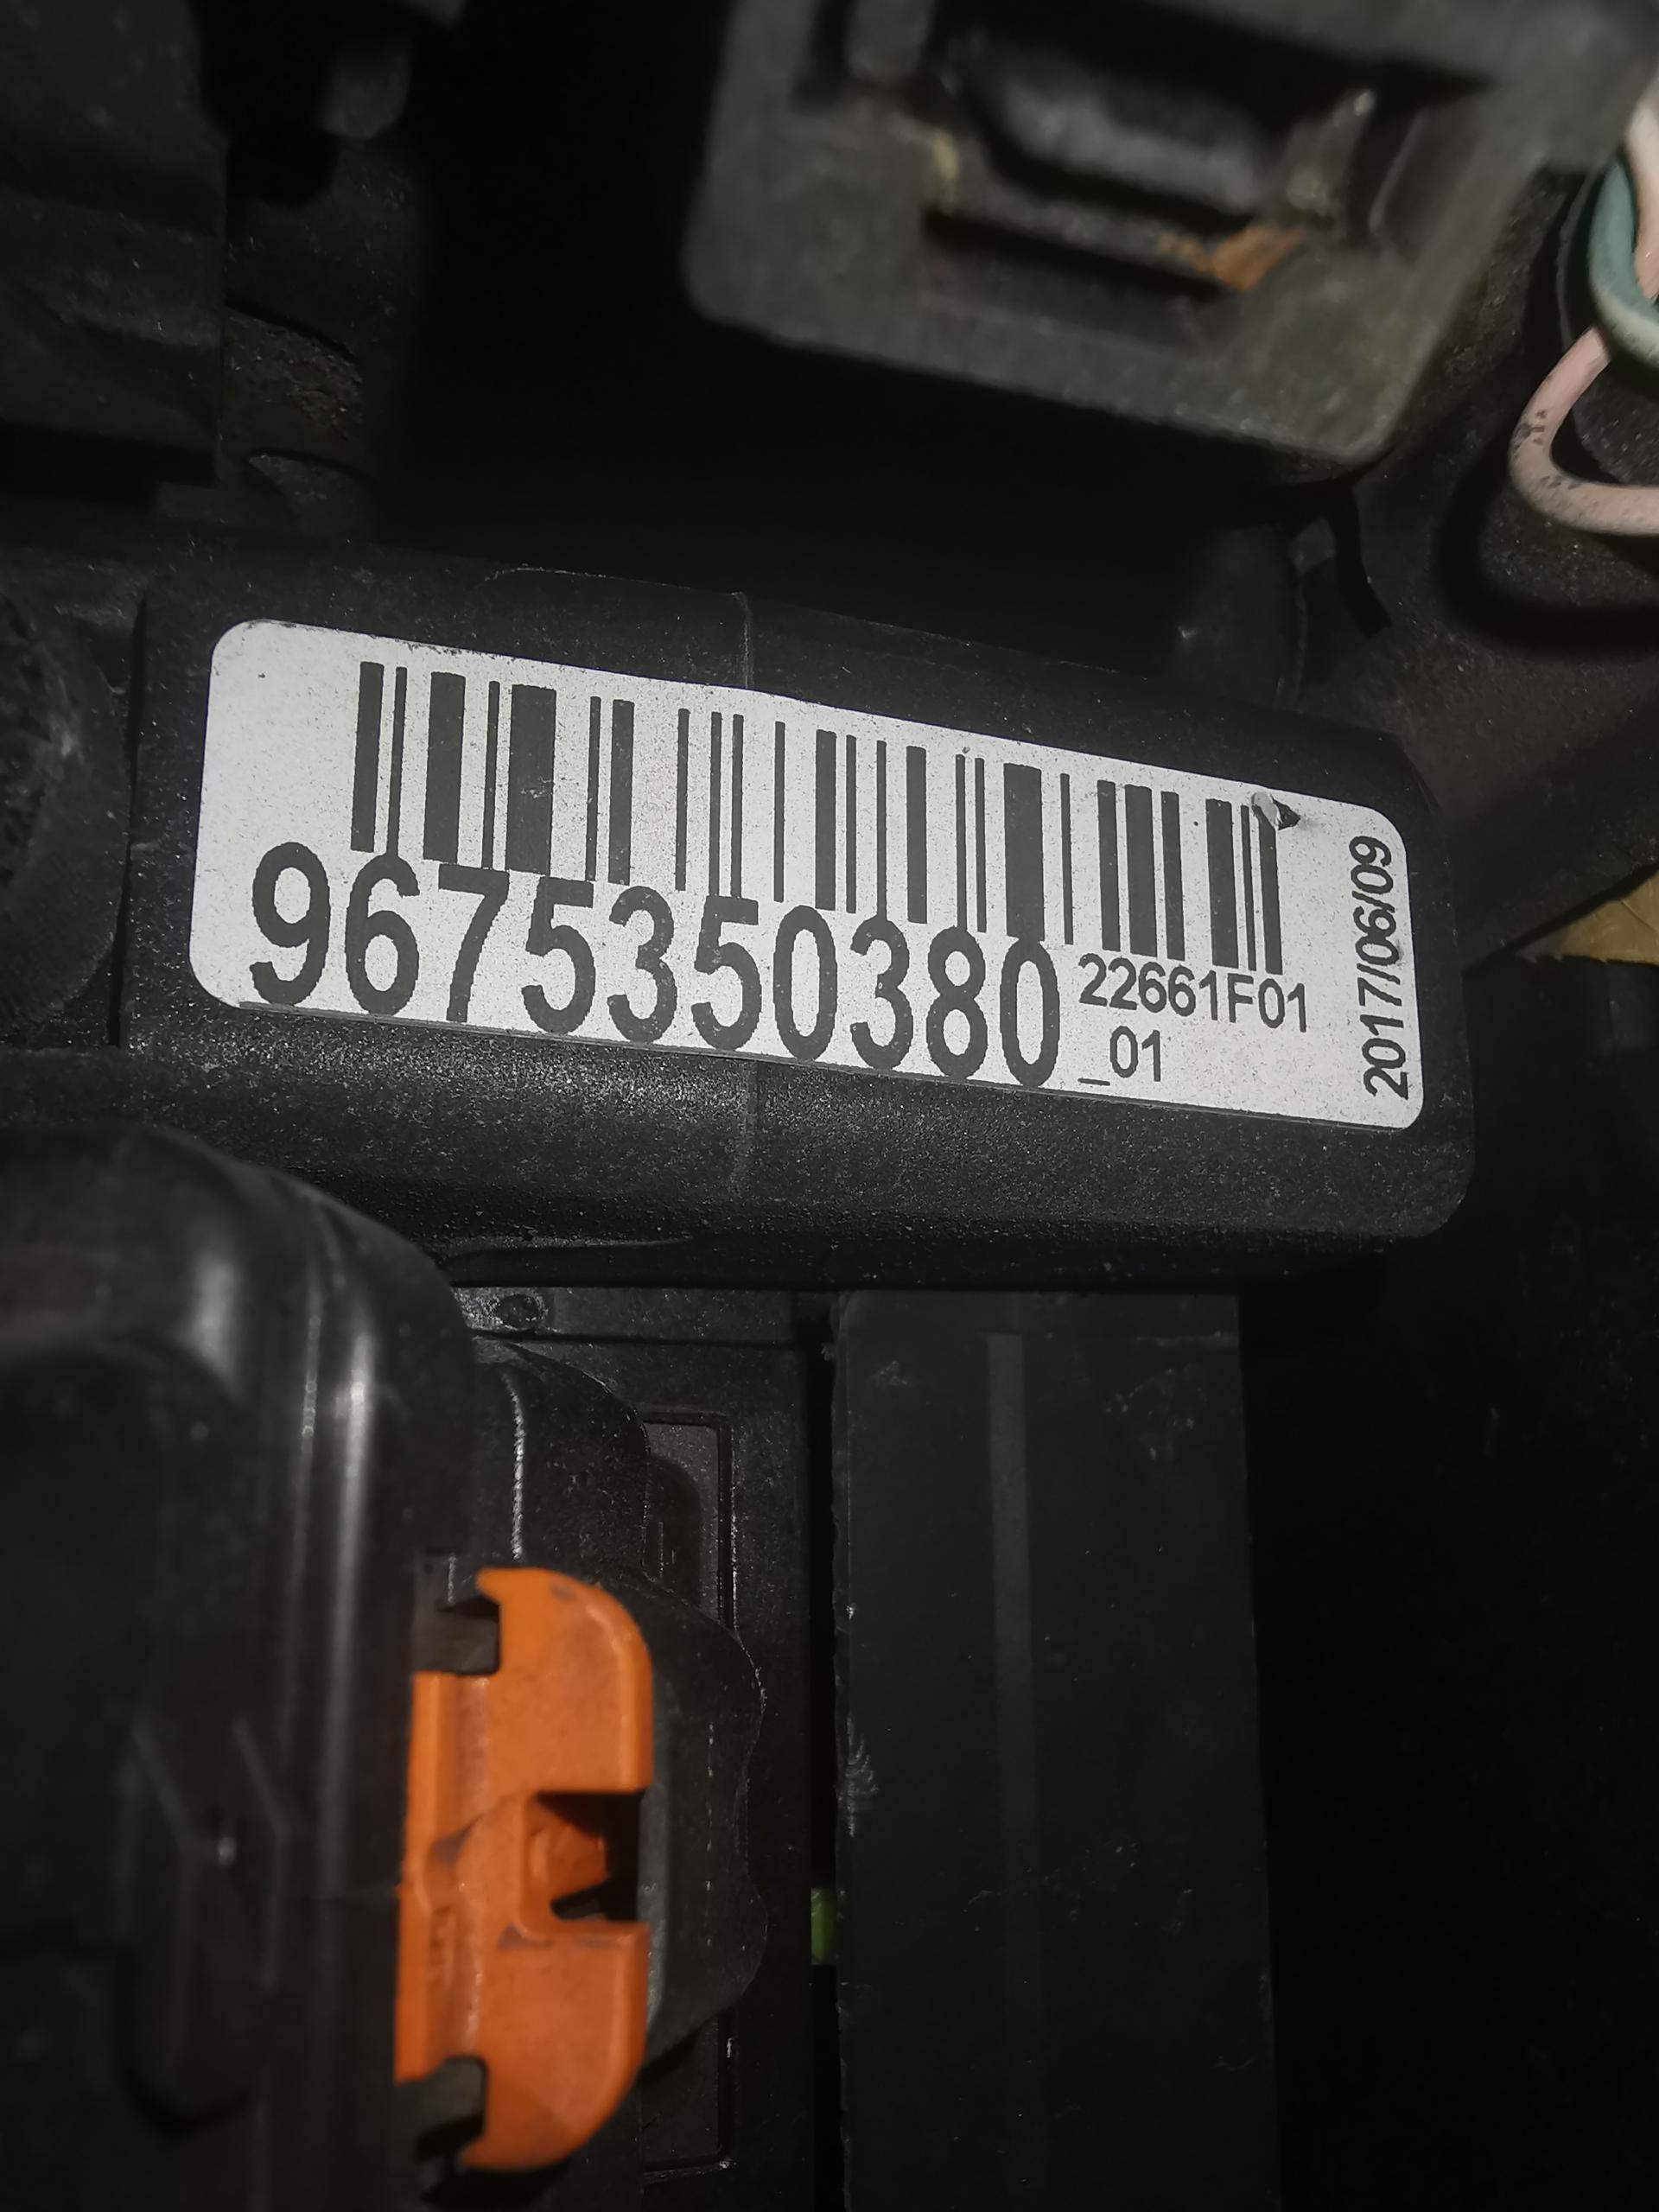 2017 Peugeot 3008 issues - Page 1 - French Bred - PistonHeads UK - The image is a photograph focusing on the back of an electronic device. There's a barcode with numbers beneath it, which is typically used for inventory and tracking purposes. This label includes the number 0197453086263, along with some other characters that are likely to be the product code or serial number. The style of the image appears to have been taken by a smartphone camera from a vertical angle, as suggested by the orientation of the device and the perspective of the shot.